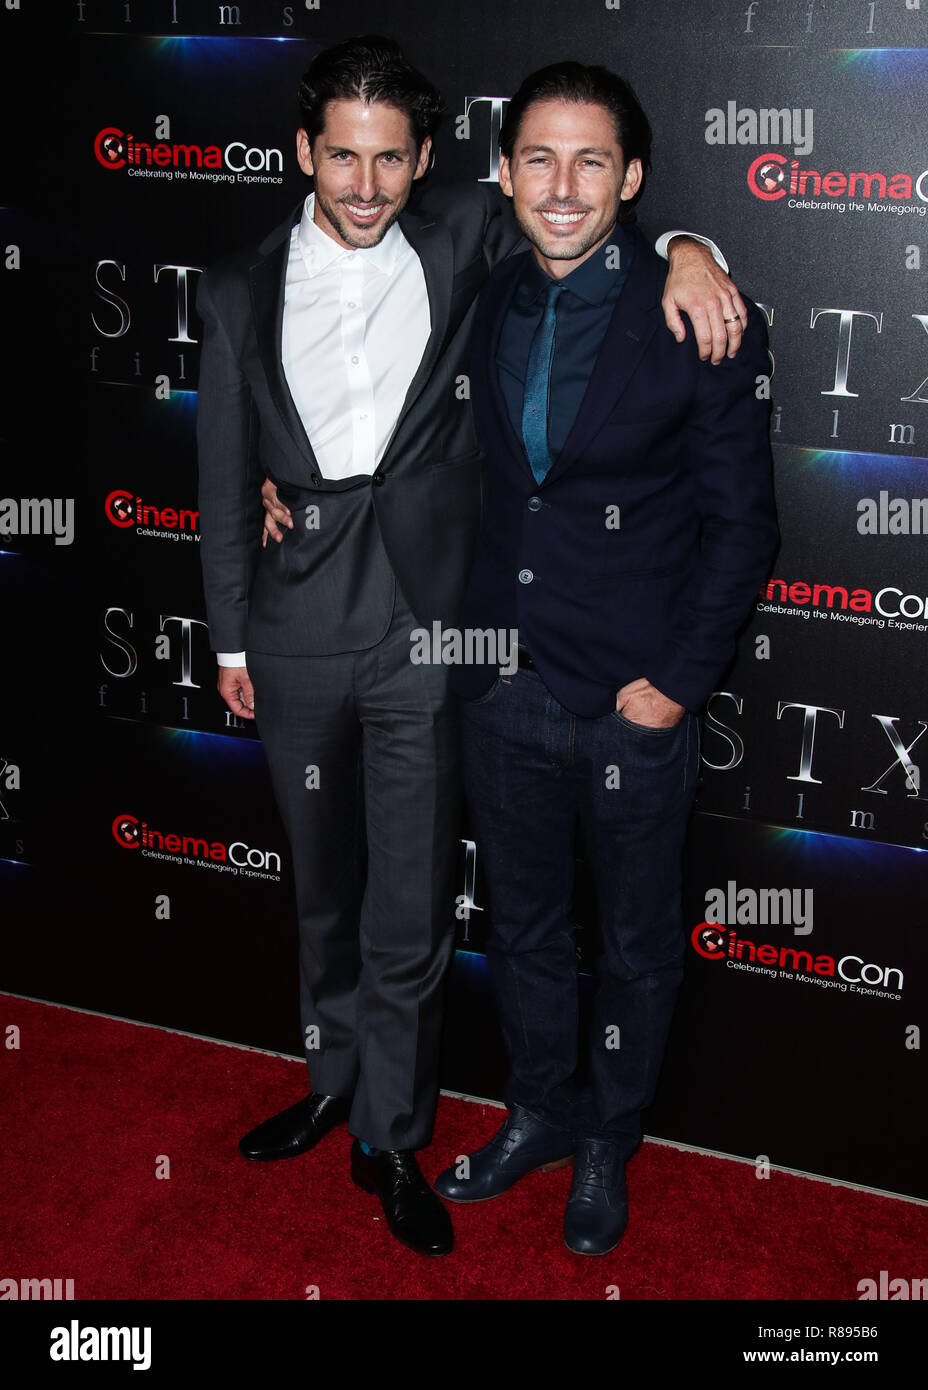 LAS VEGAS, NV, USA - APRIL 24: Aaron Kandell, Jordan Kandell at CinemaCon 2018 - STX Entertainment The State Of The Industry: Past, Present And Future Presentation held at The Colosseum at Caesars Palace during CinemaCon, the official convention of the National Association of Theatre Owners on April 24, 2018 in Las Vegas, Nevada, United States. (Photo by Xavier Collin/Image Press Agency) Stock Photo